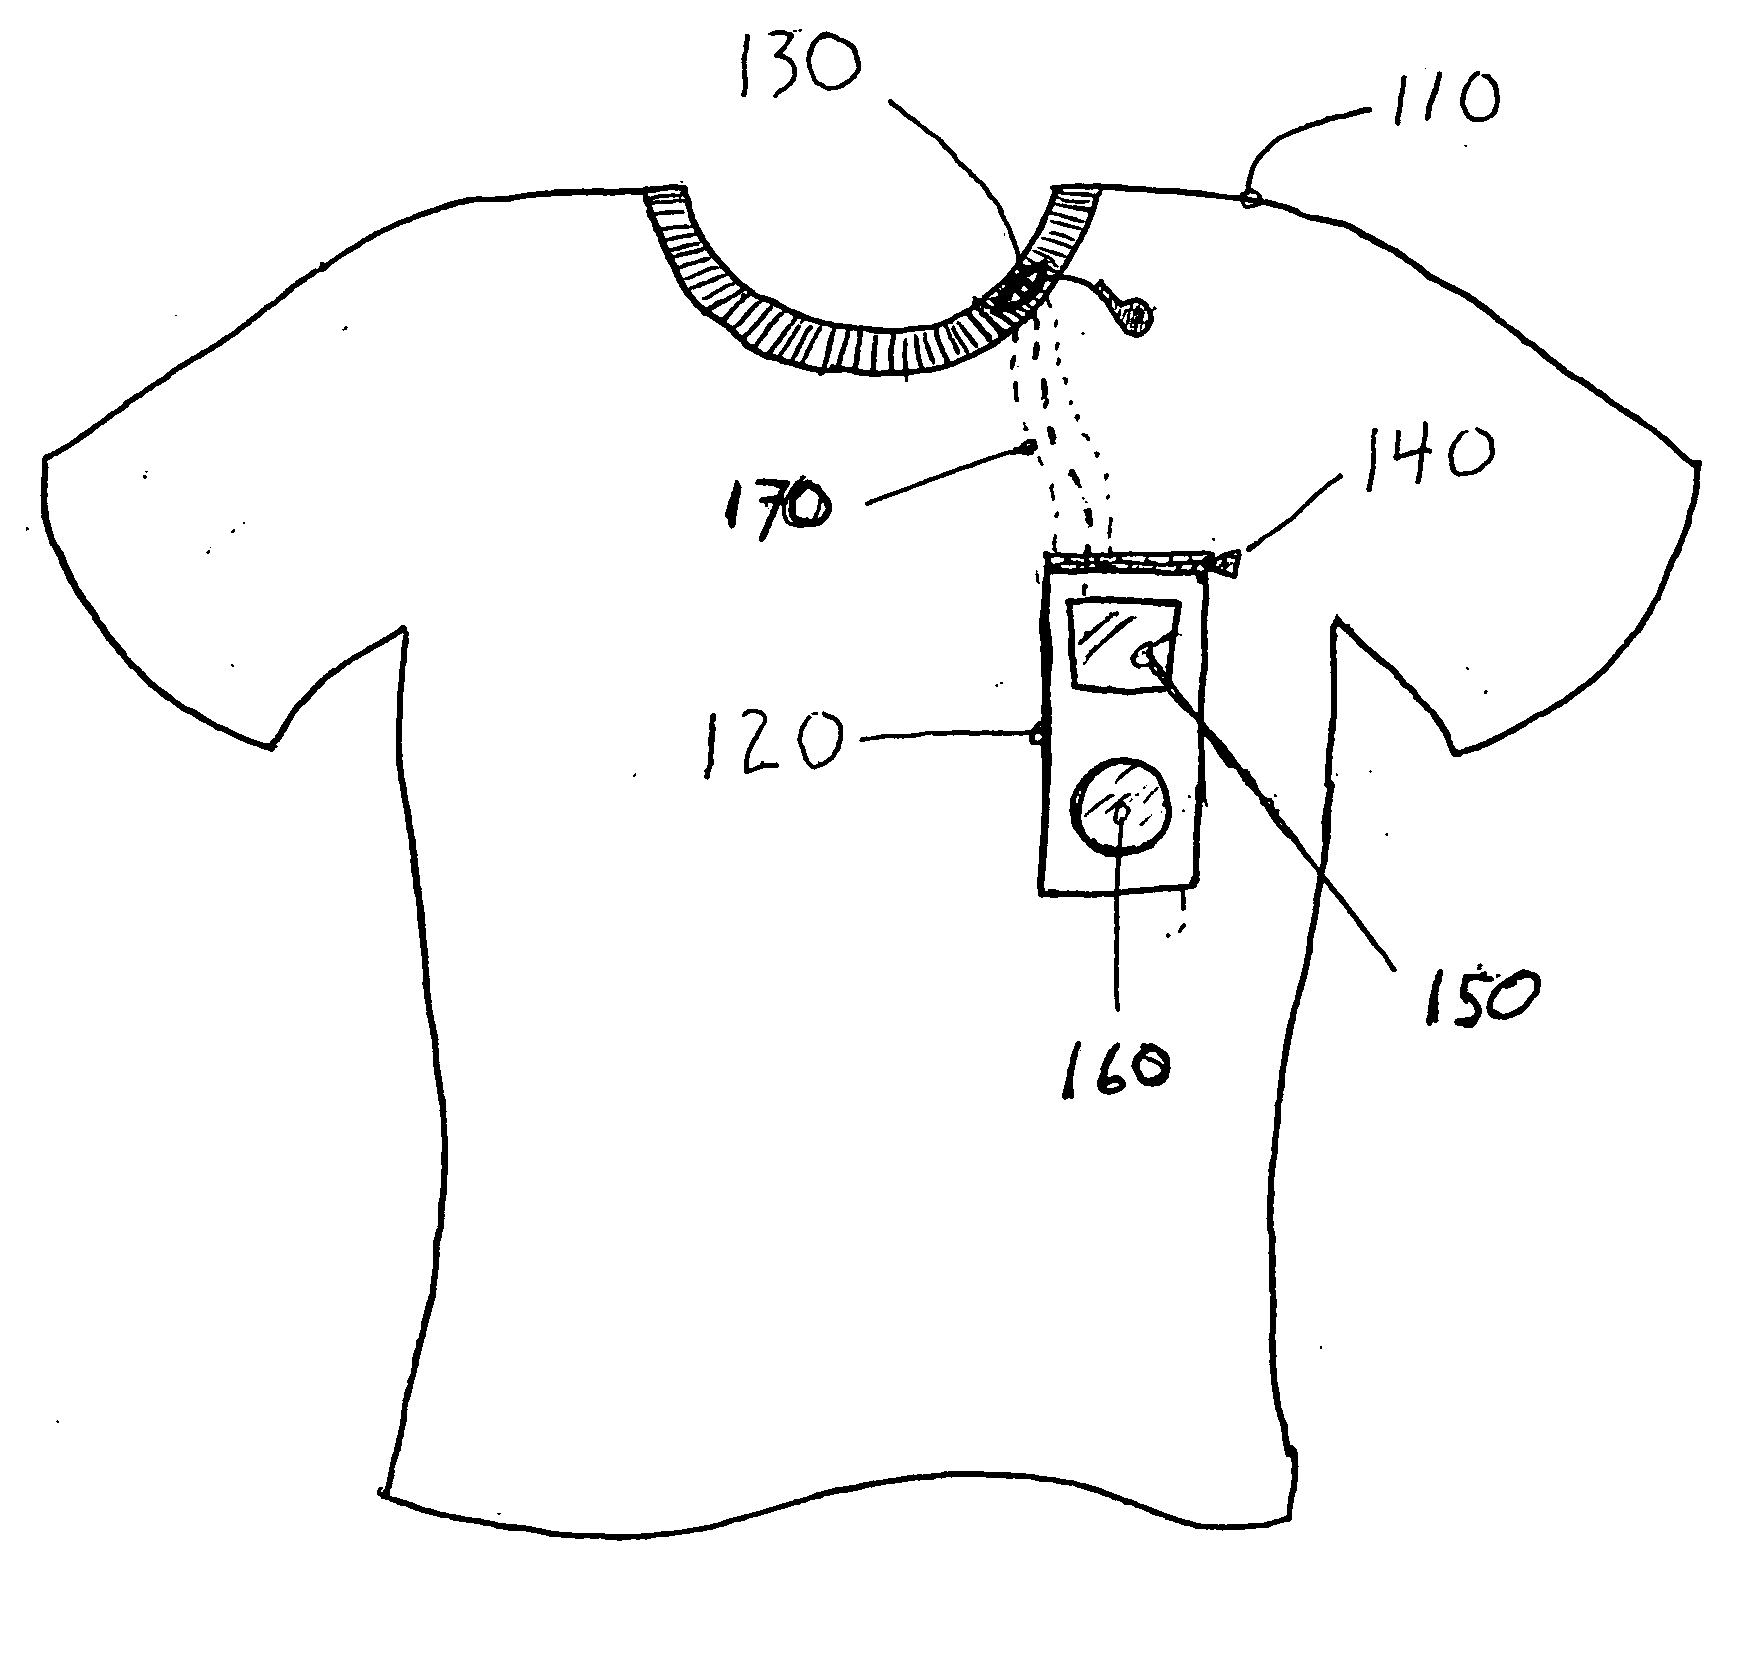 Specialty clothing designed to hold portable electronic devices